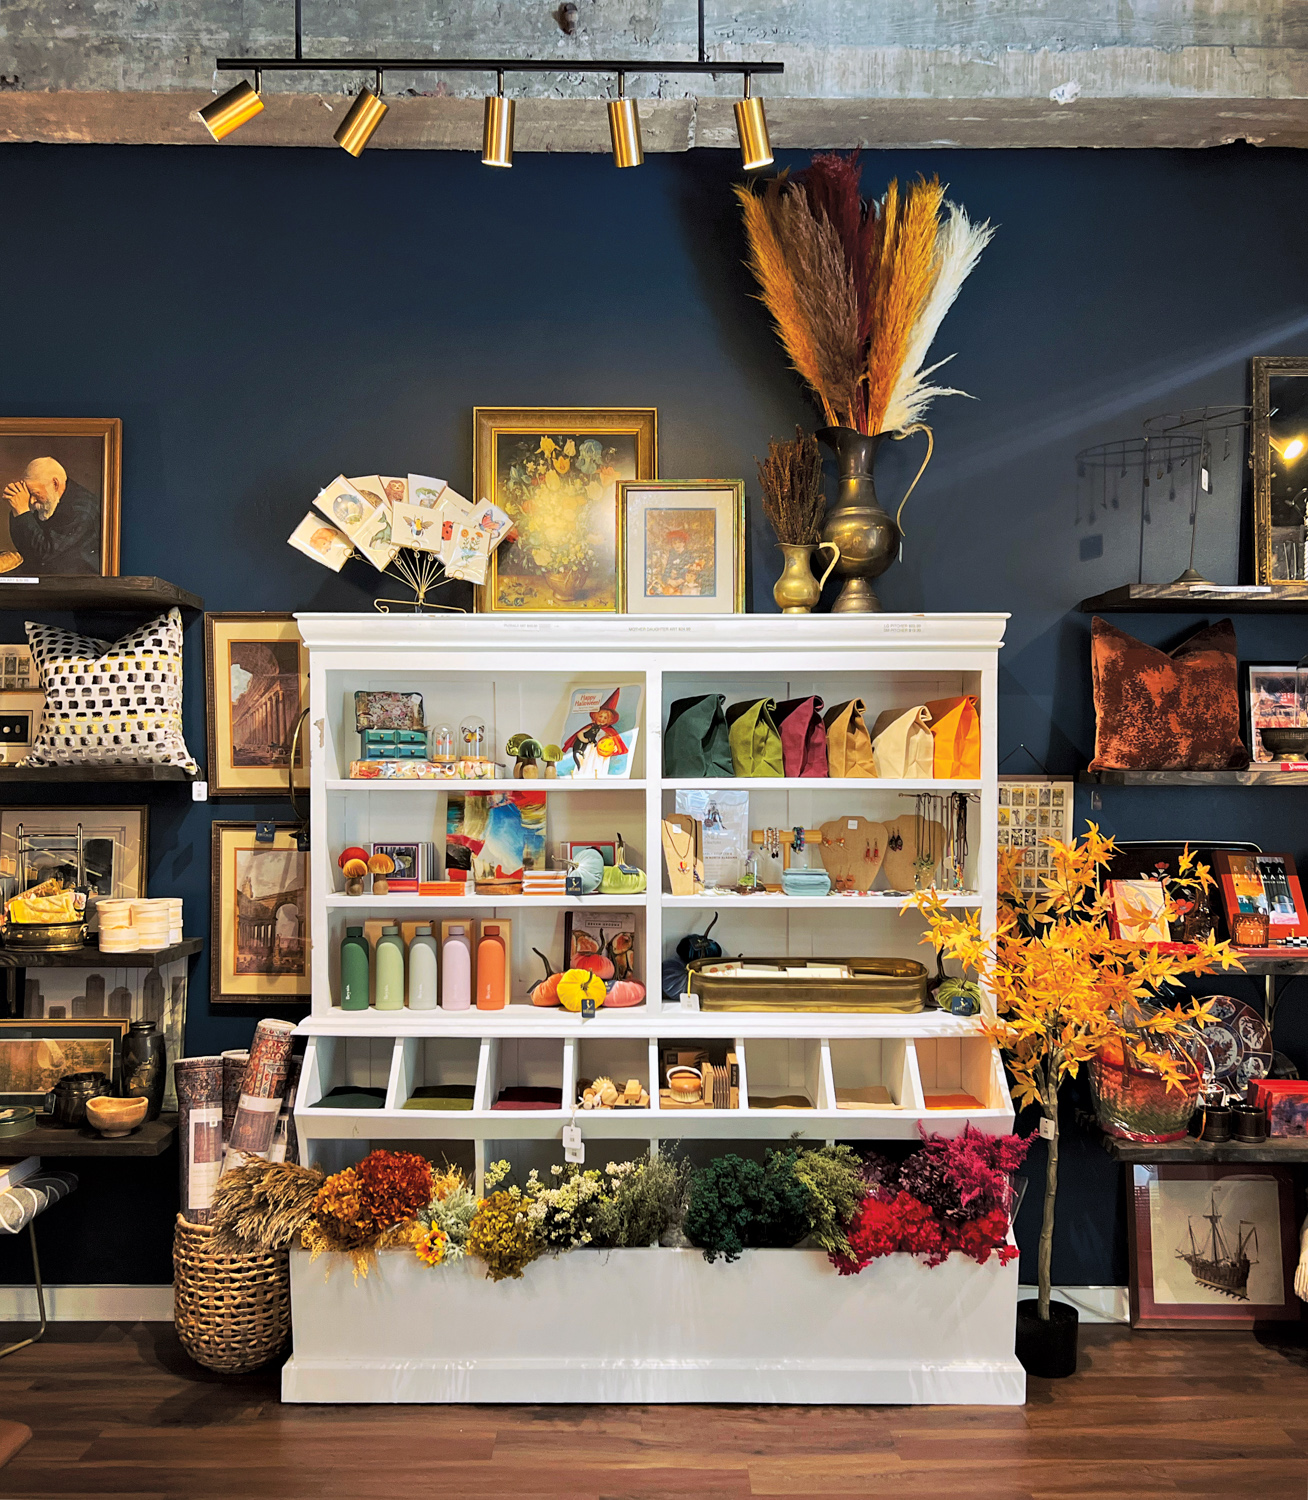 Open white cabinetry against dark blue walls holds colorful dried botanicals and home accessories